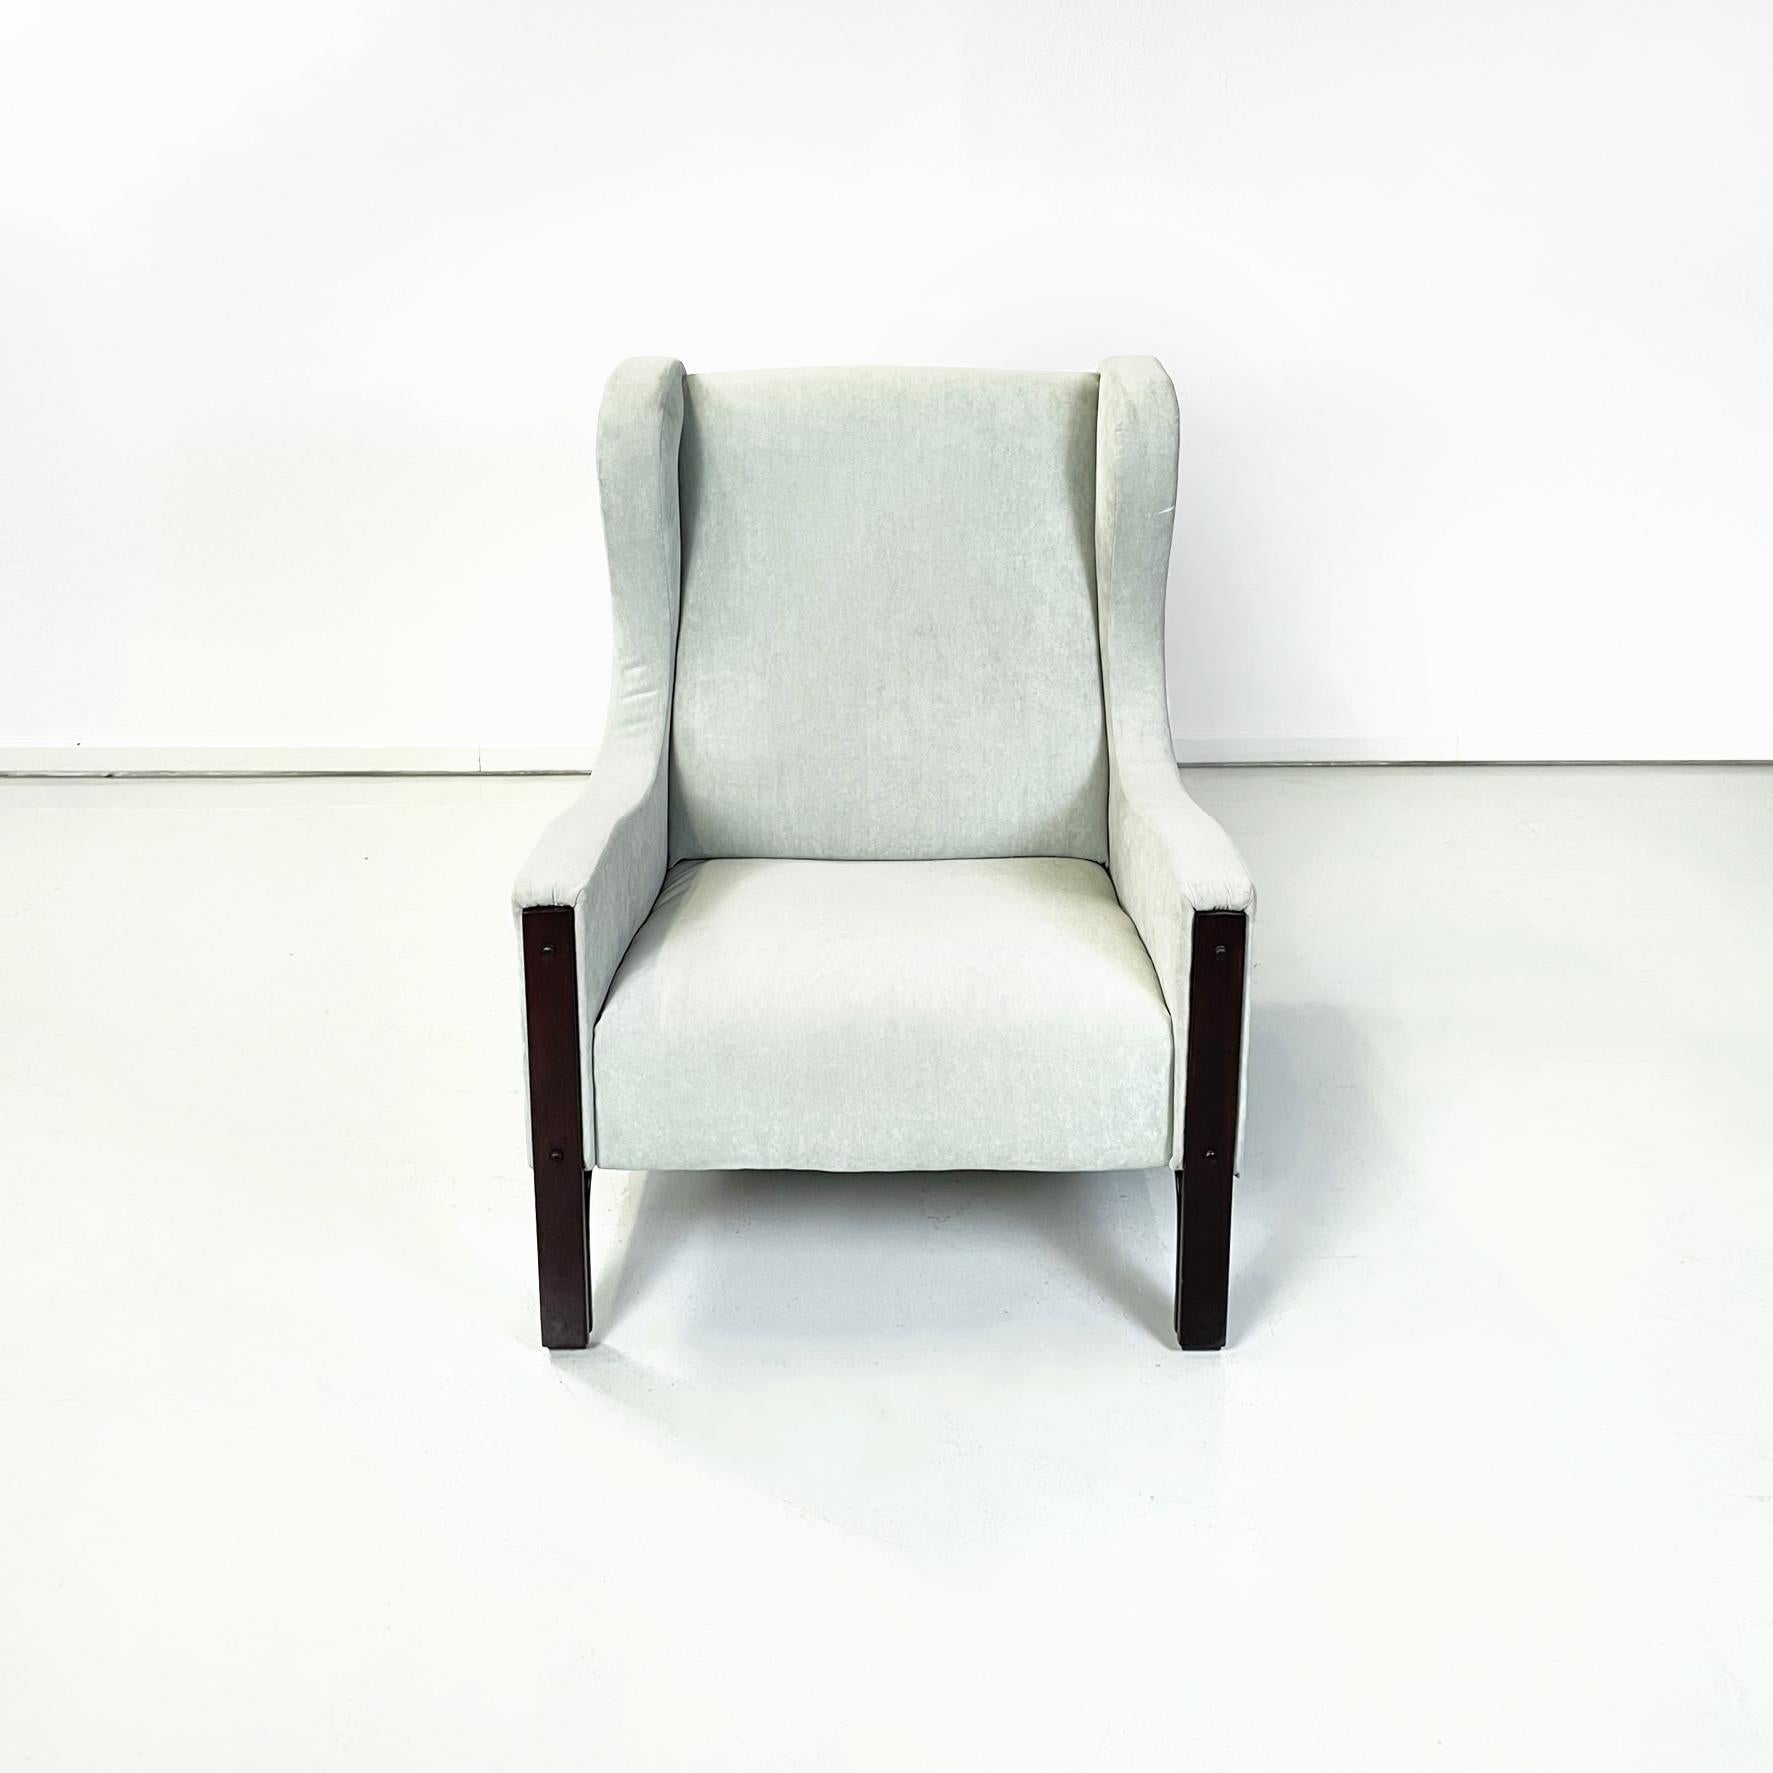 Italian Mid-Century Modern armchair in light grey velvet by Tito Agnoli for Mobilia, 1960s
Elegant armchair upholstered and covered in light gray velvet fabric. The backrest has side headrests. The structure is in solid wood with fluted paw and